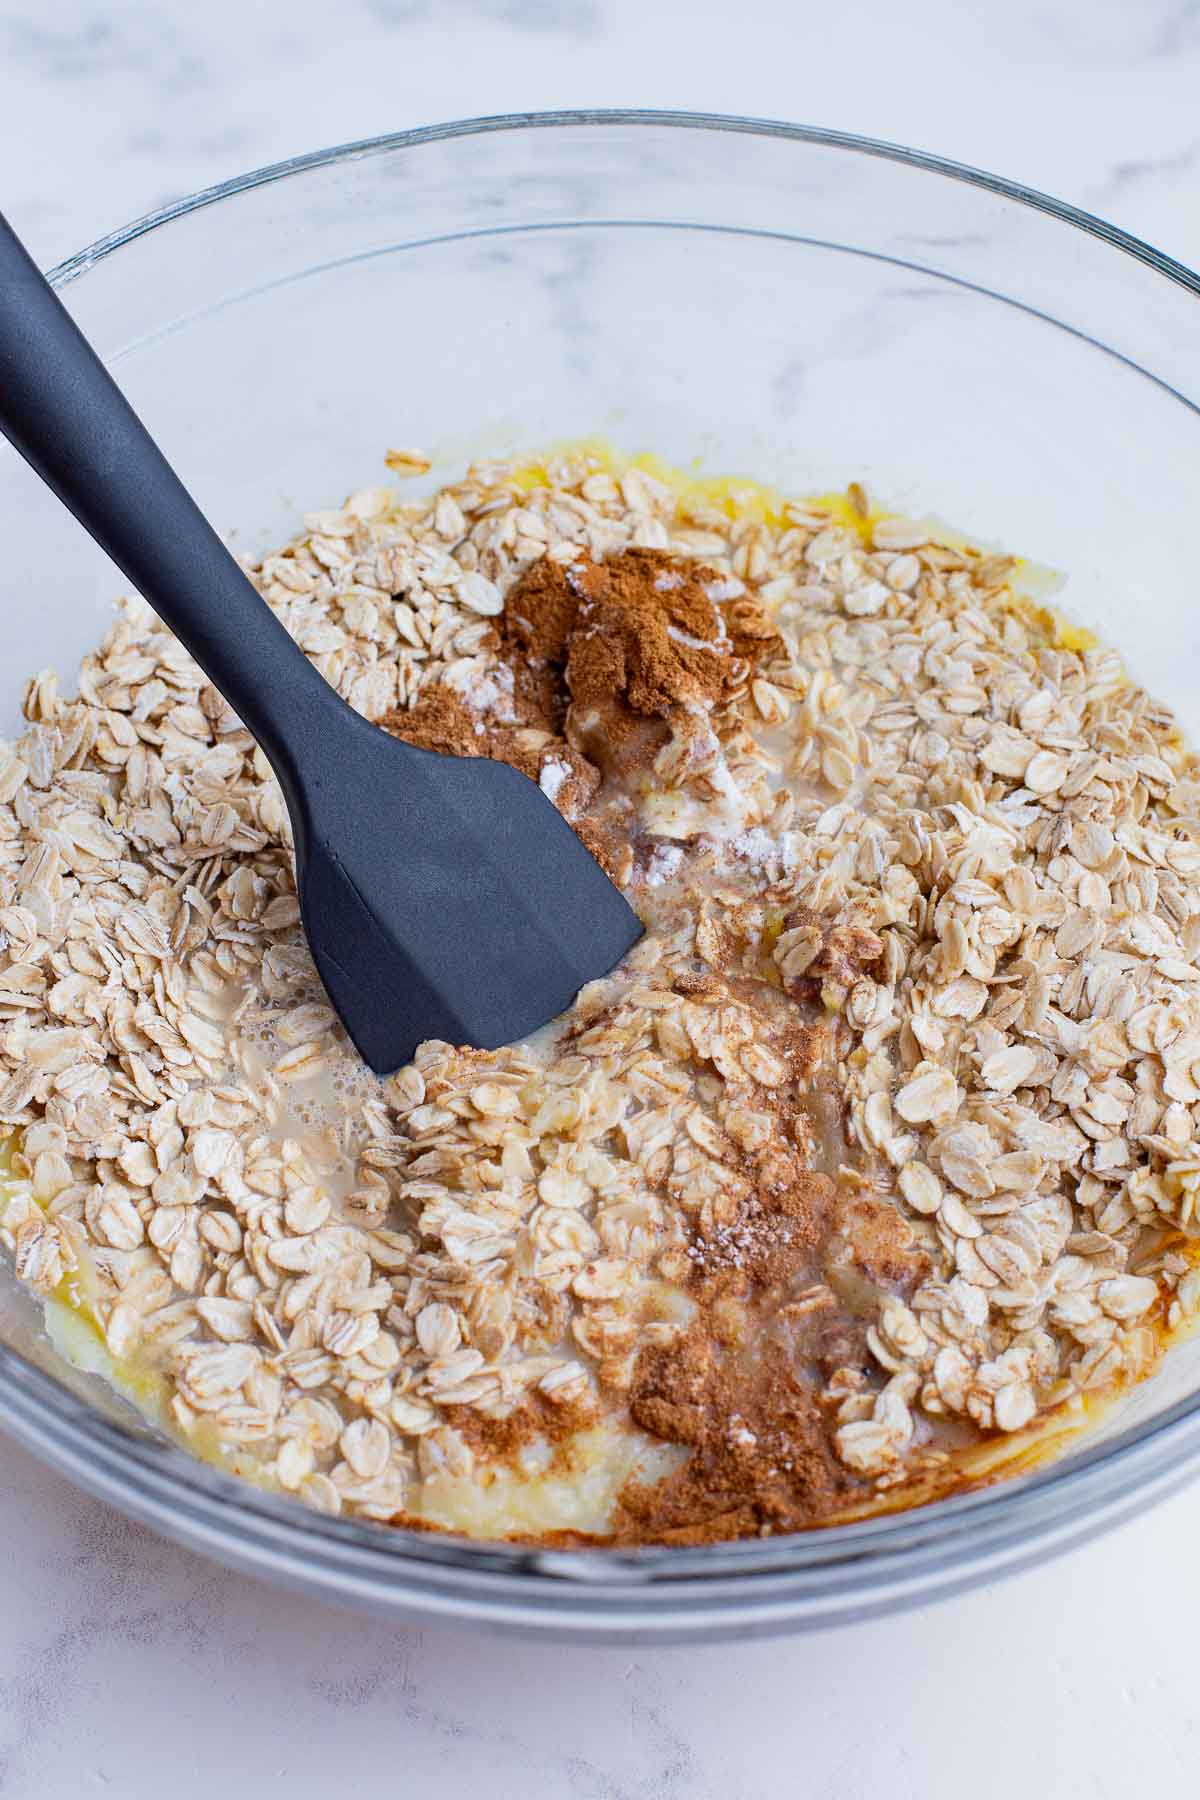 Oats and spices are added to the mix.